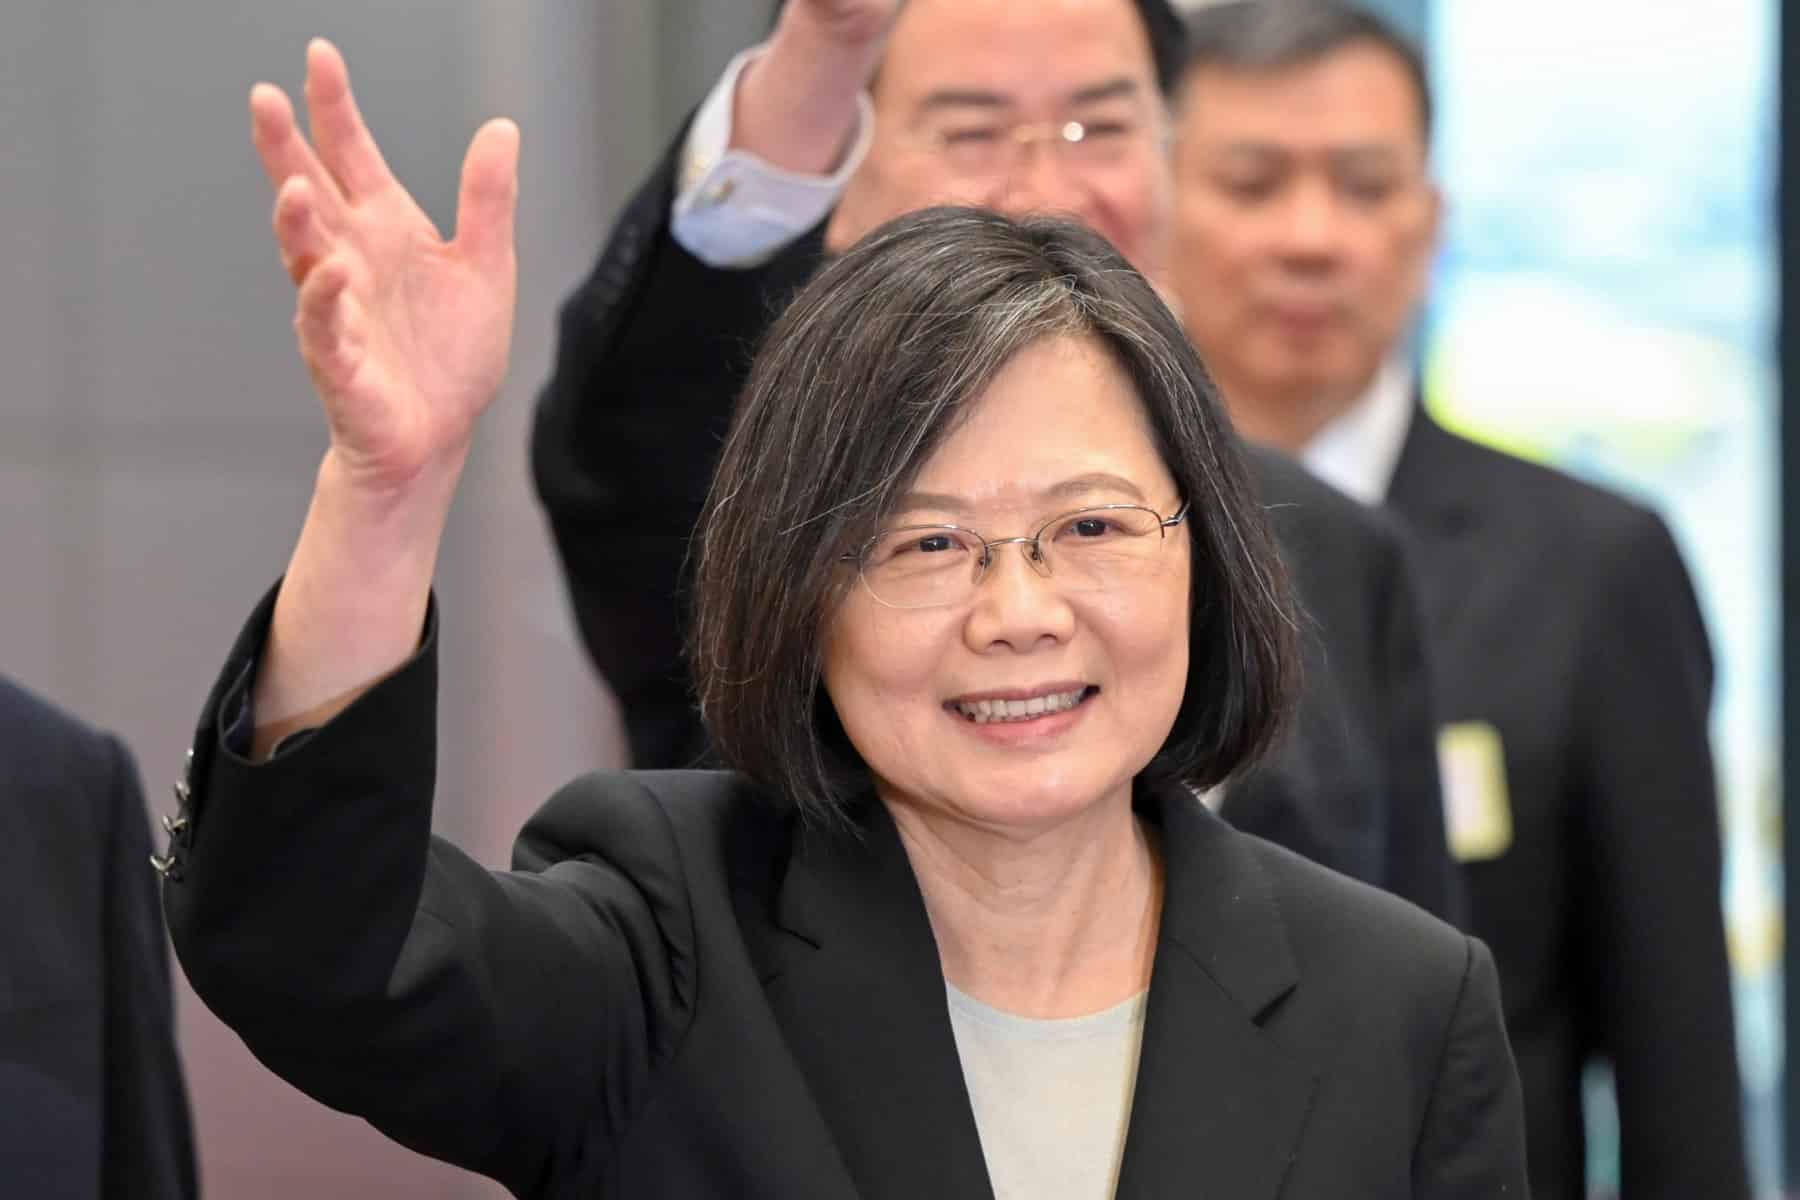 Taiwan President Tsai Ing-wen waves as she arrives at the boarding gate of the international airport in Taoyuan on March 29, 2023. - Tsai was due to leave for the United States on March 29, a stop on her way to firm ties with Guatemala and Belize after China snapped up another of the self-ruled island's few diplomatic allies last week. (Photo by Sam Yeh / AFP)